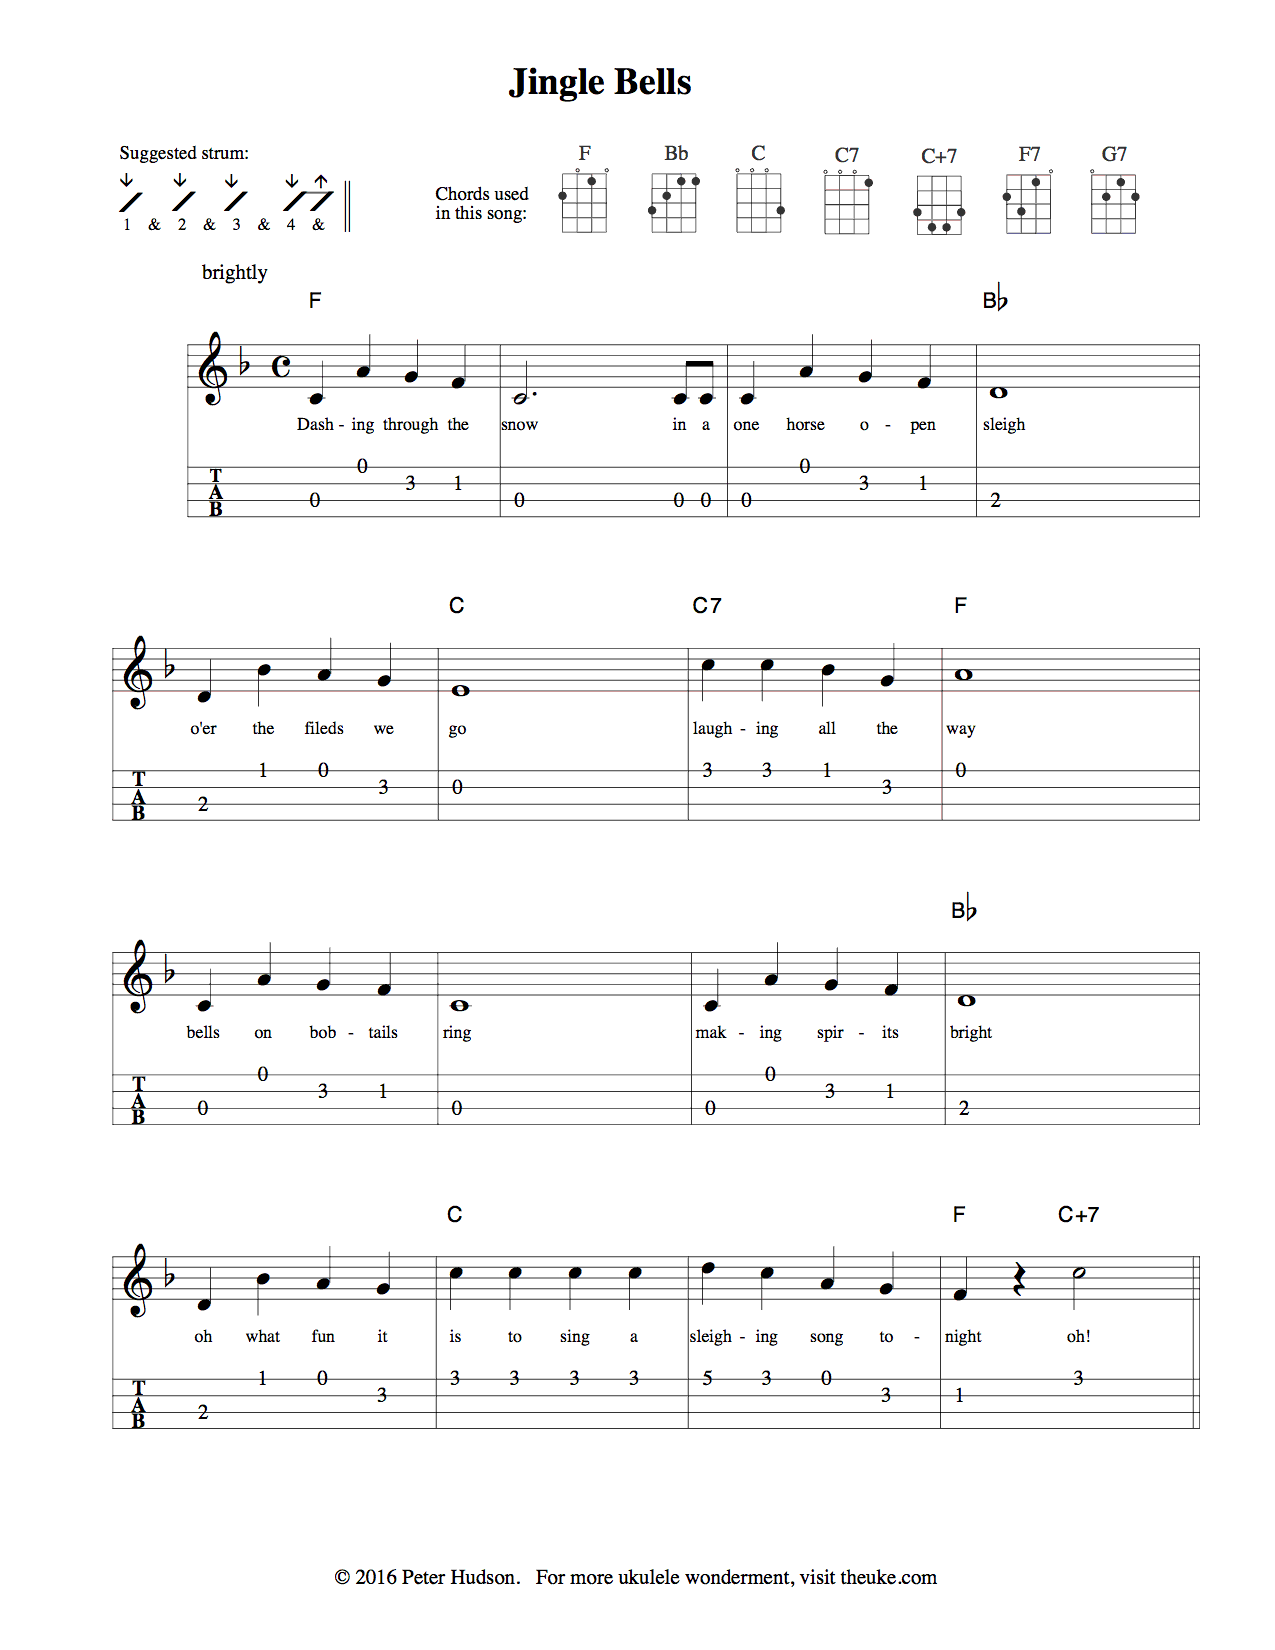 sheet-with-chord-boxes-and-lyric-lines-tab-blank-notebook